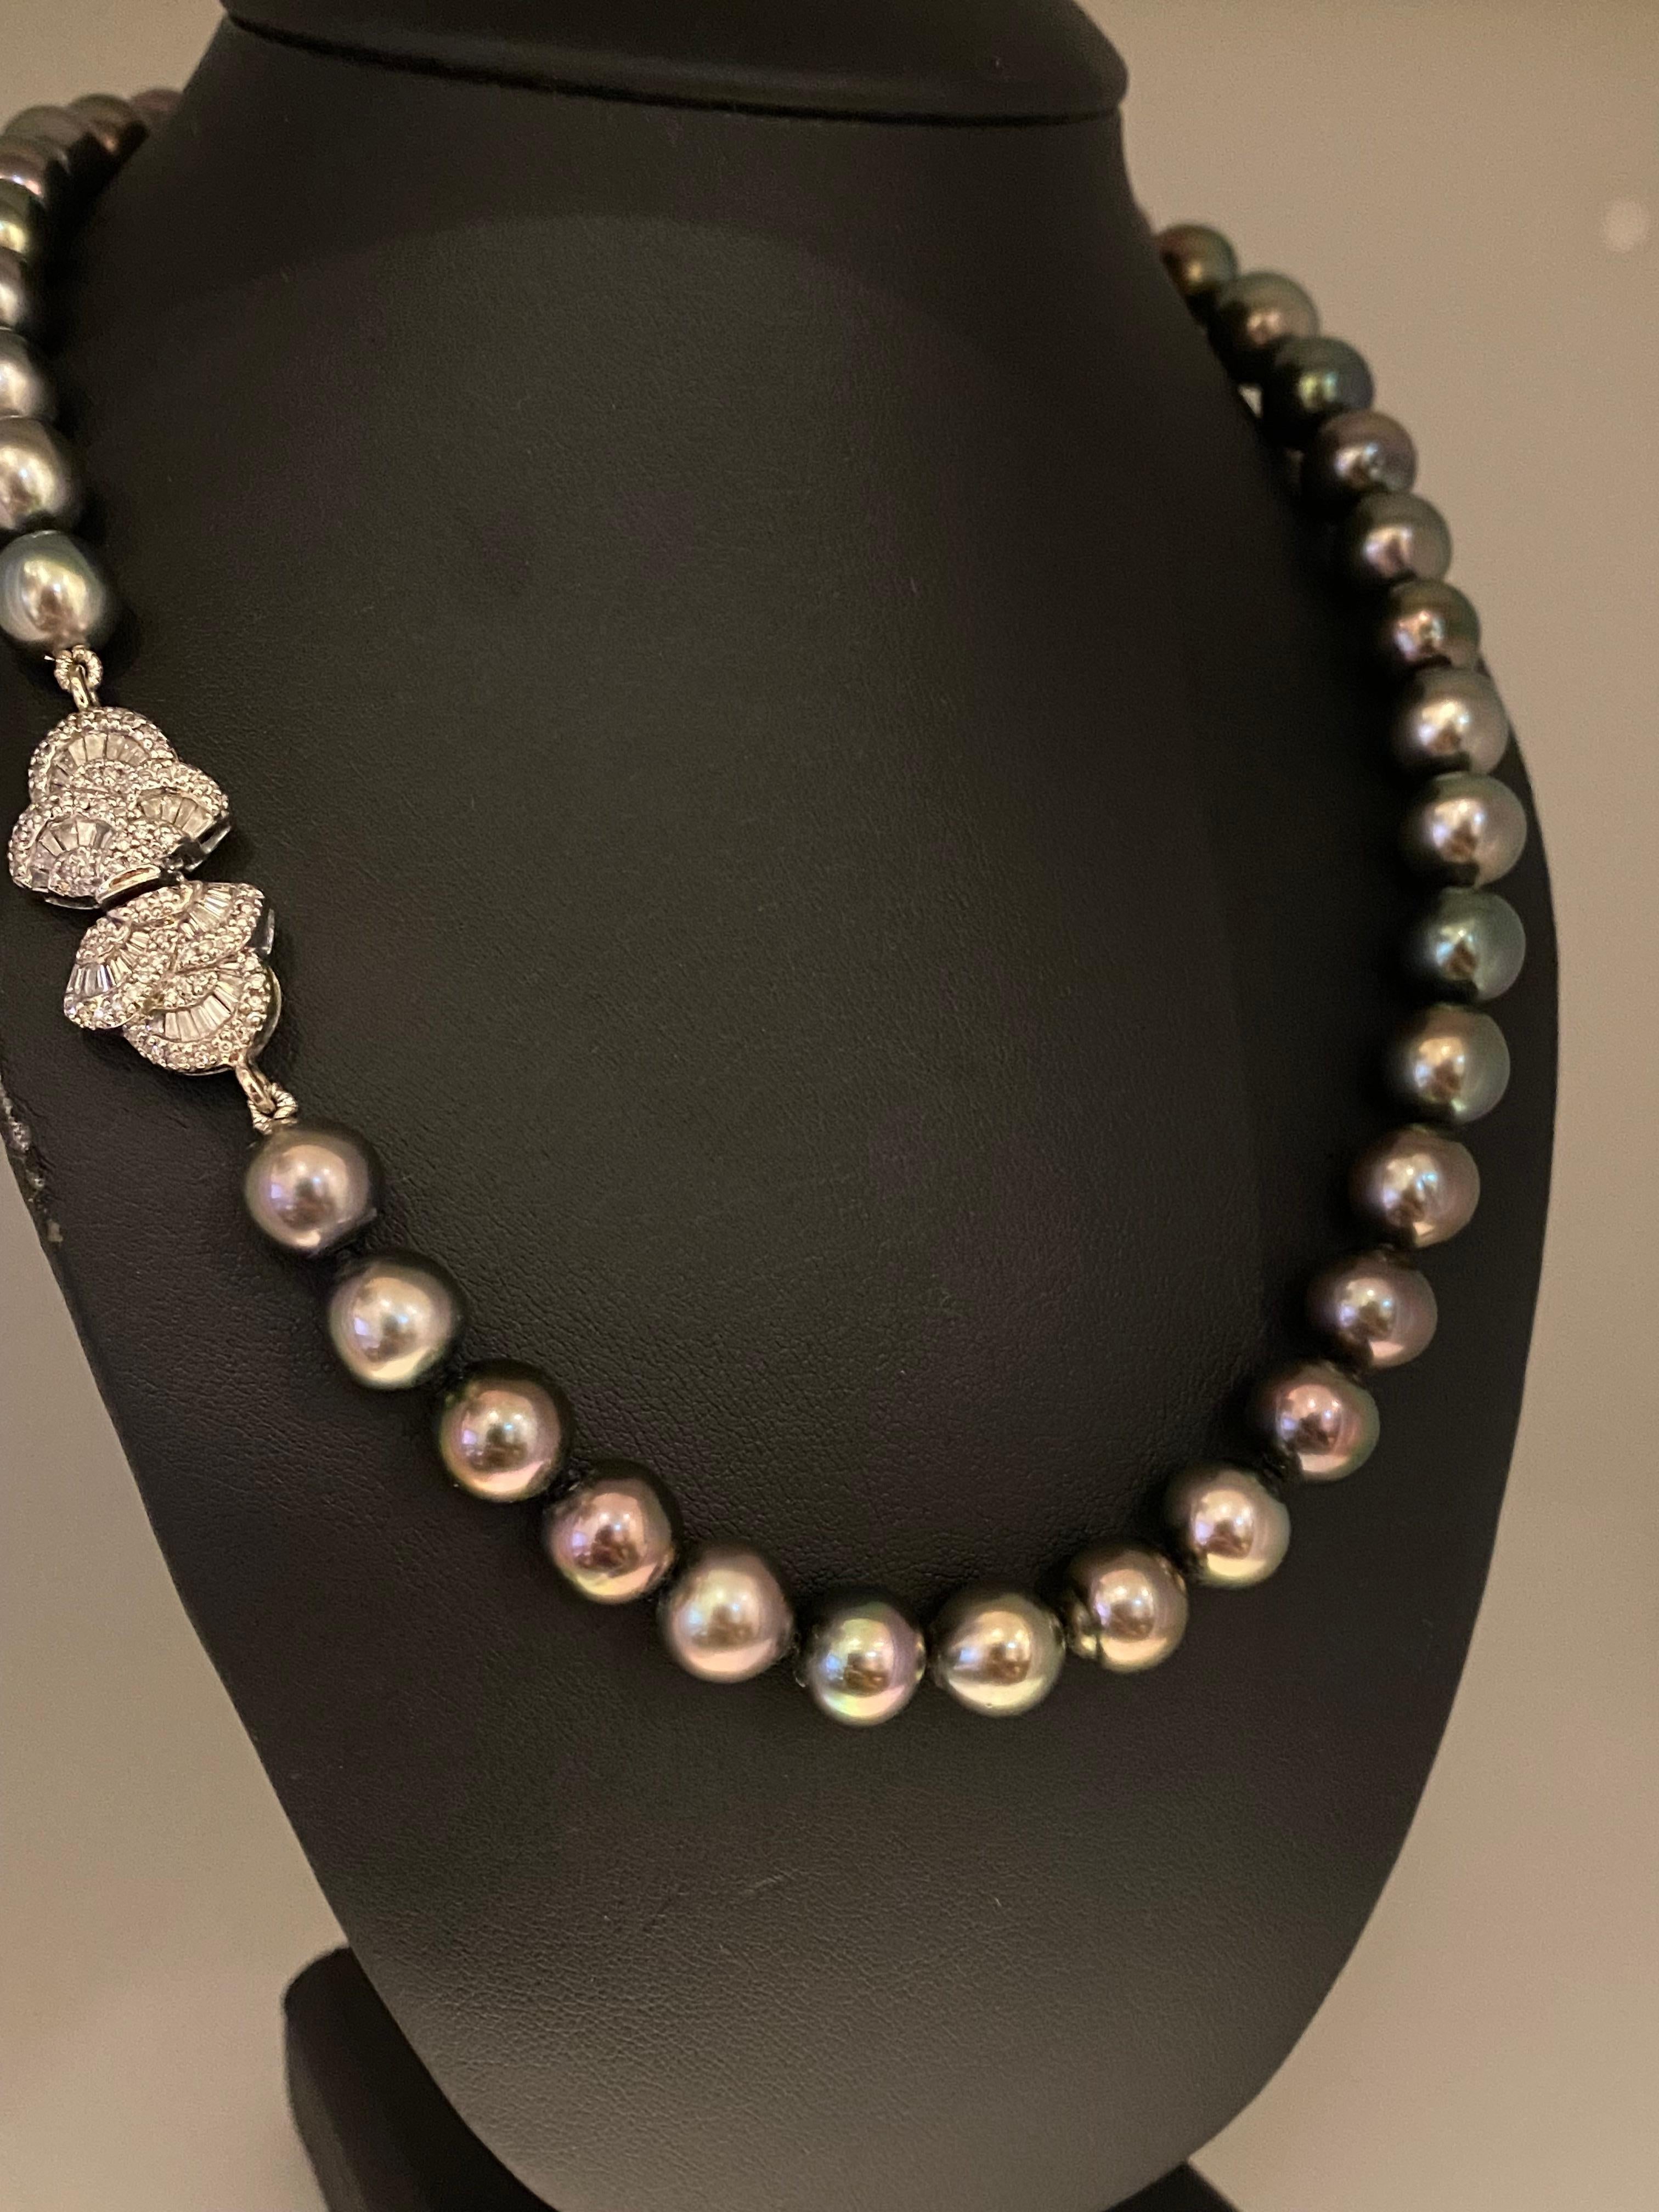 Tahitian Royal Peacock 9-11mm Pearl Necklace with 18K Gold 1.25ct Diamond Clasp For Sale 1